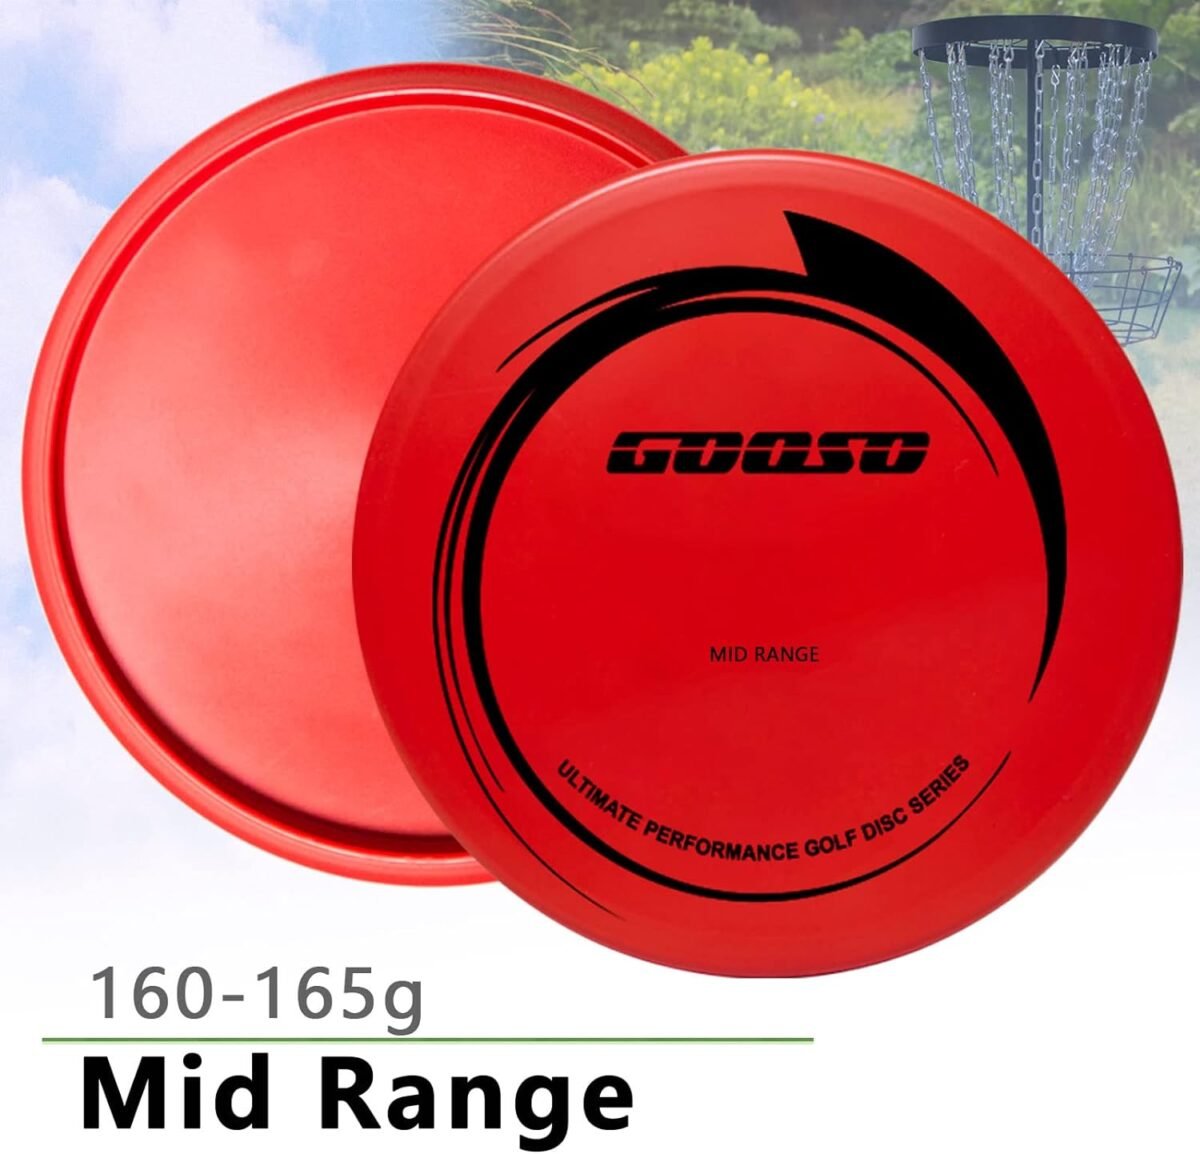 Comparing Disc Golf Sets, Bags & Drivers: Which Reigns Supreme?